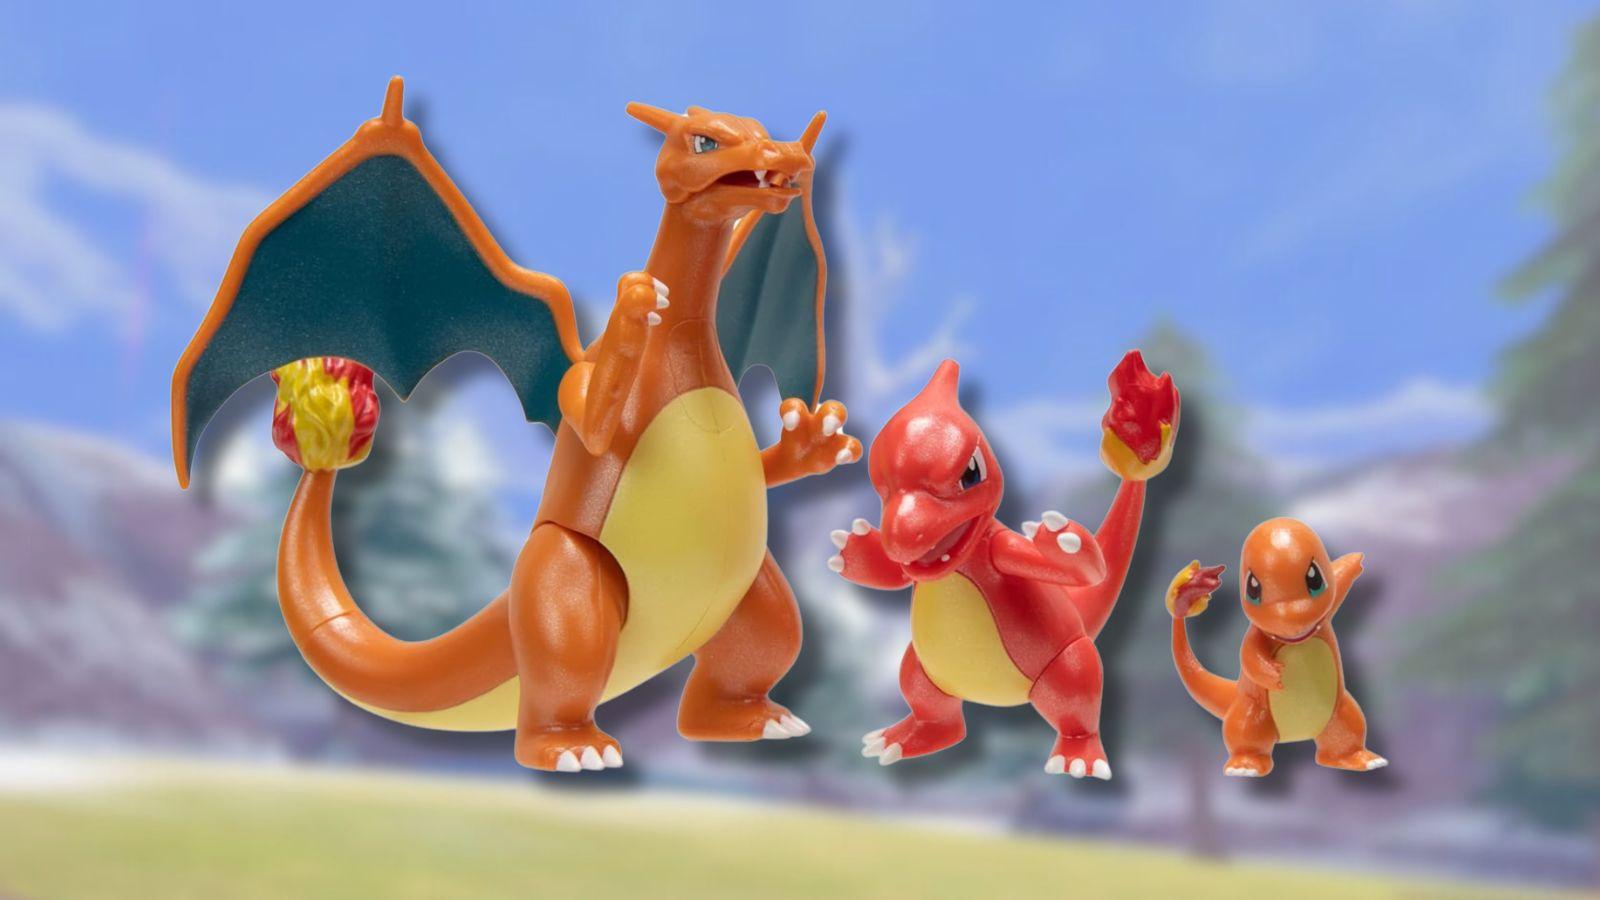 Charizard evolution chain with forest background.